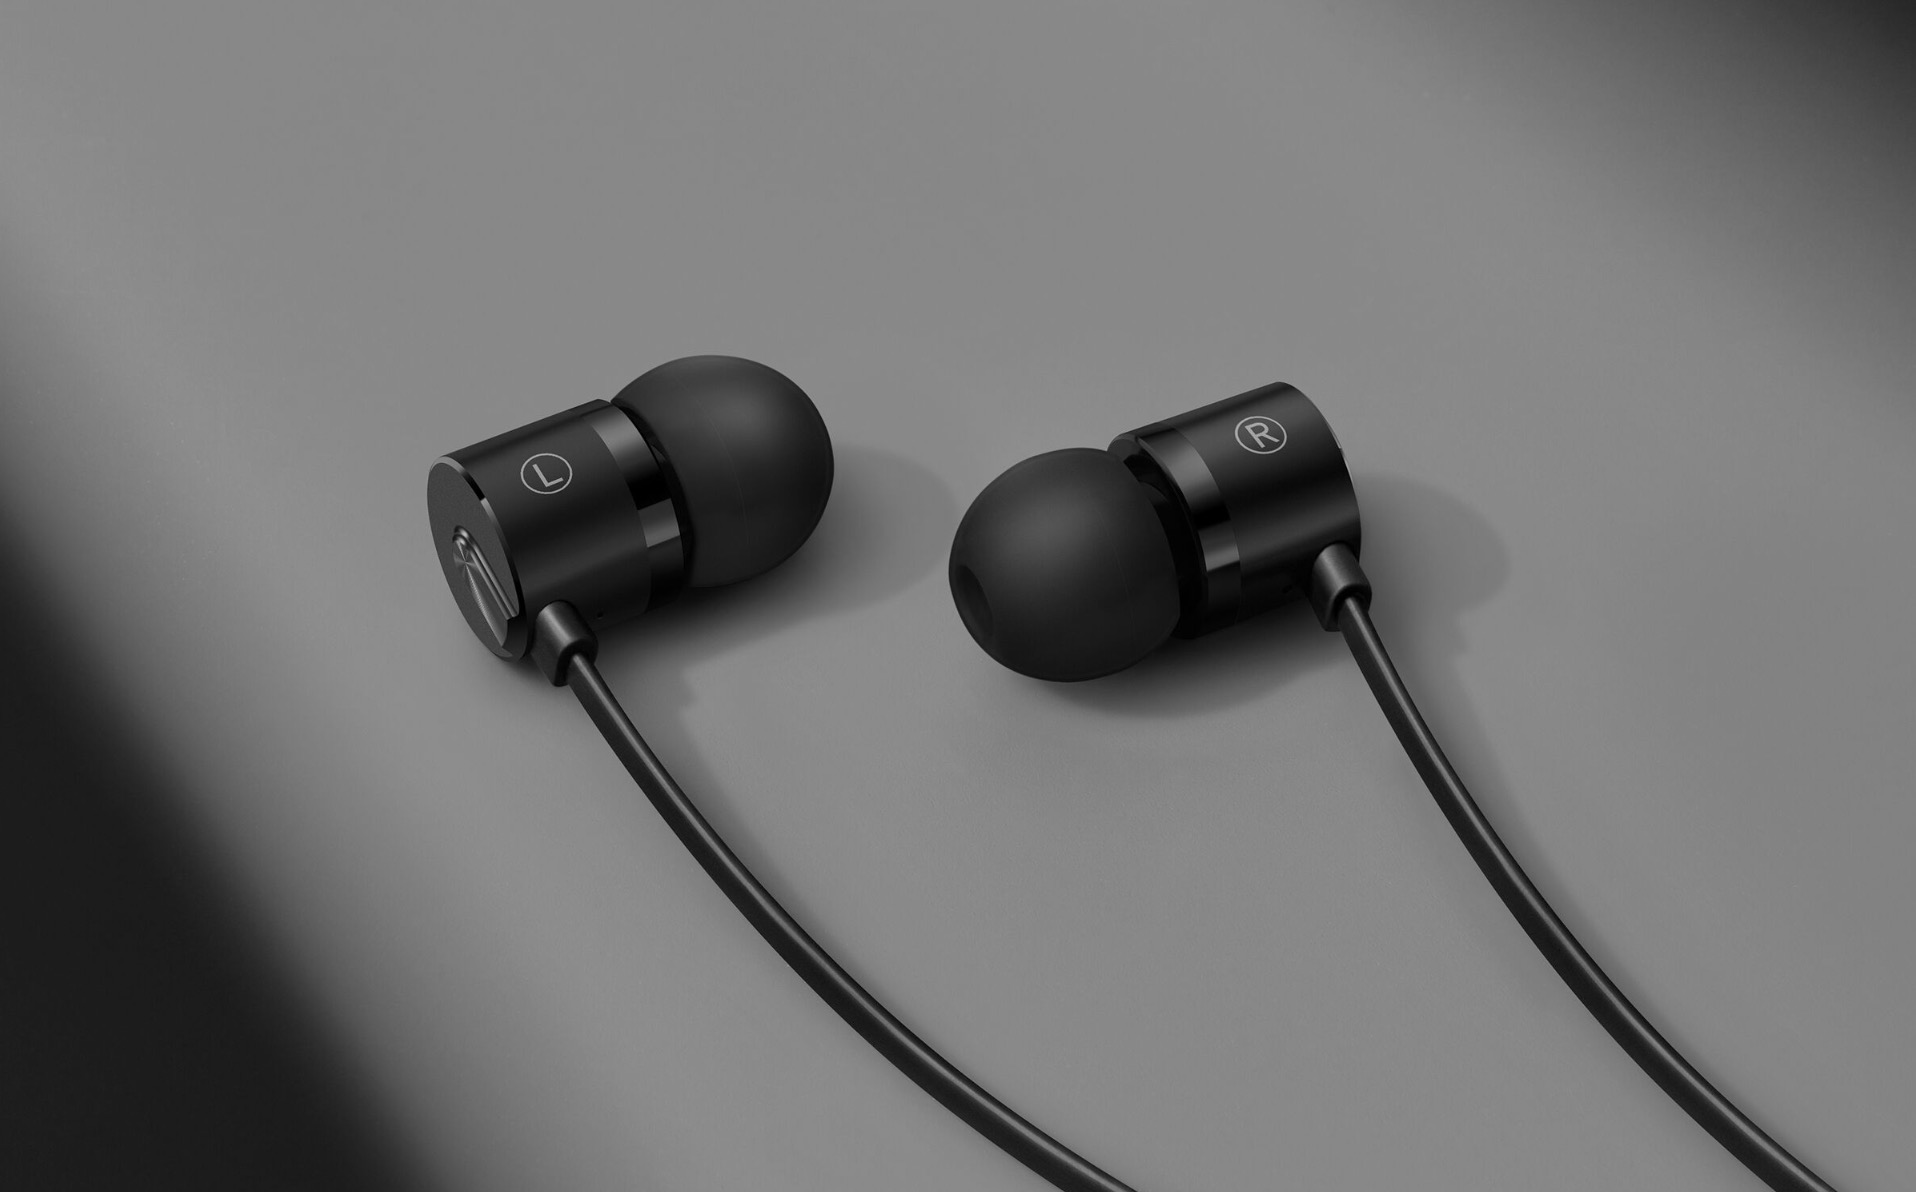 OnePlus USB-C Earbuds Because OnePlus 6T Won't a Headphone Jack